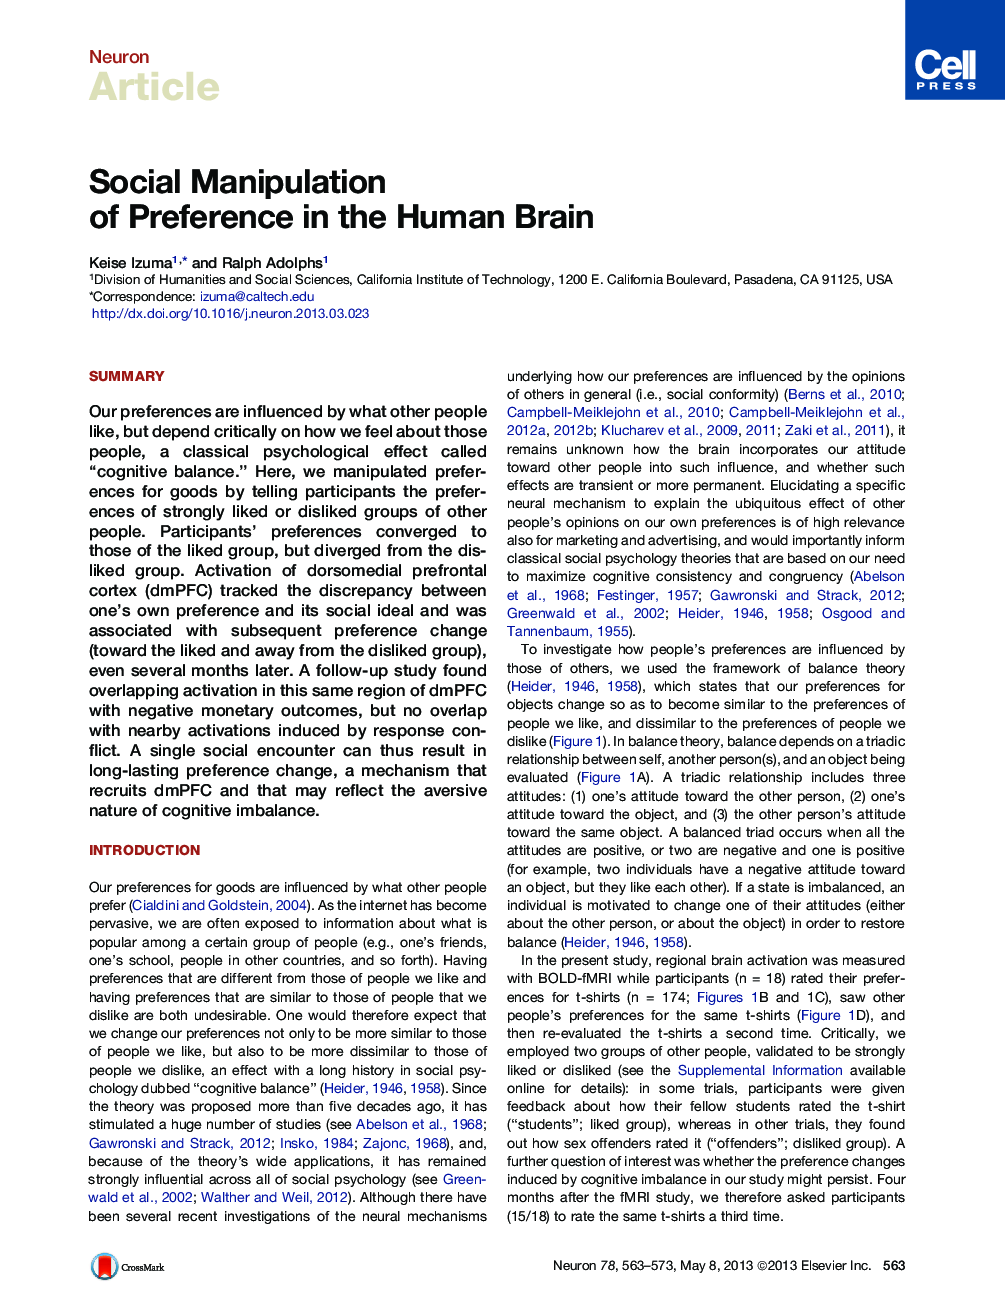 Social Manipulation of Preference in the Human Brain